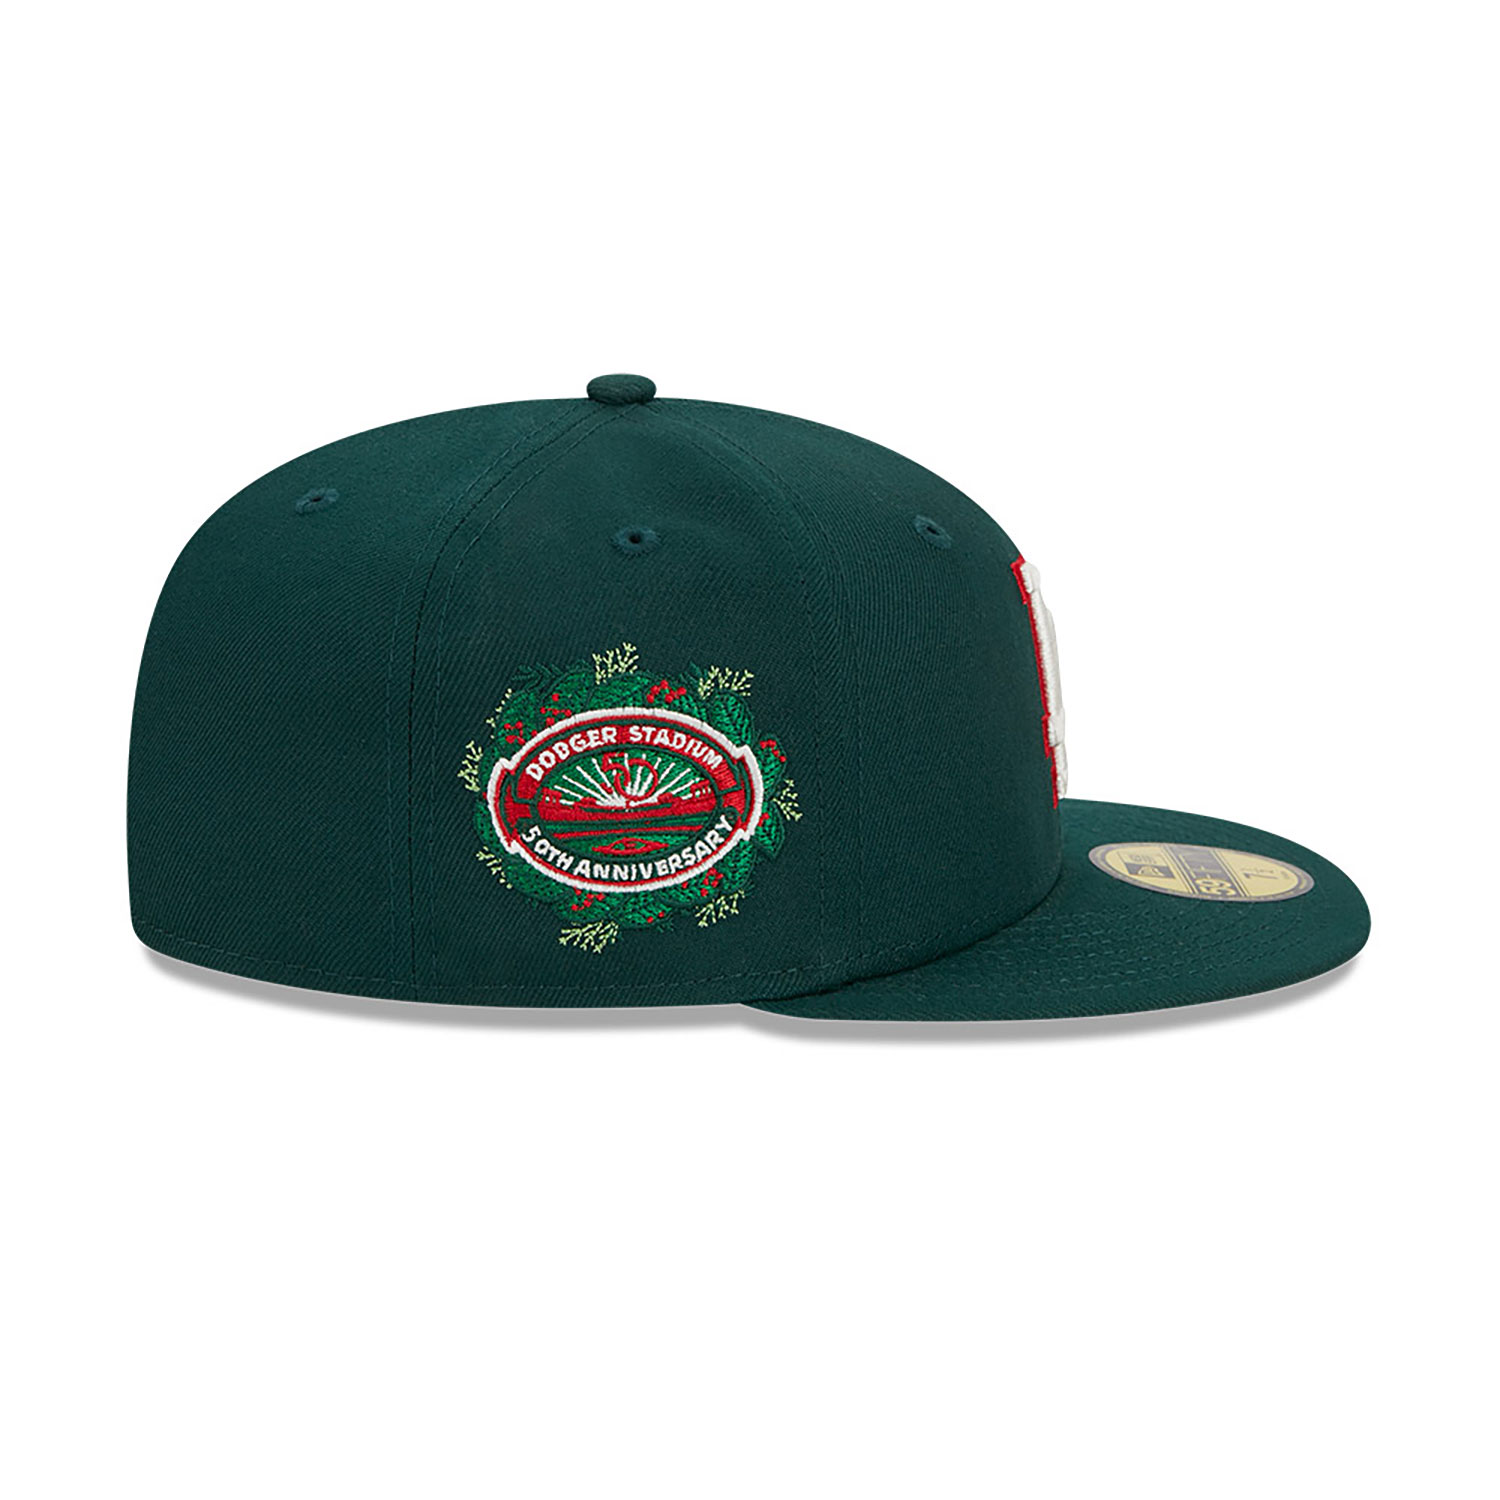 LA Dodgers Spice Berry Dark Green 59FIFTY Fitted Cap